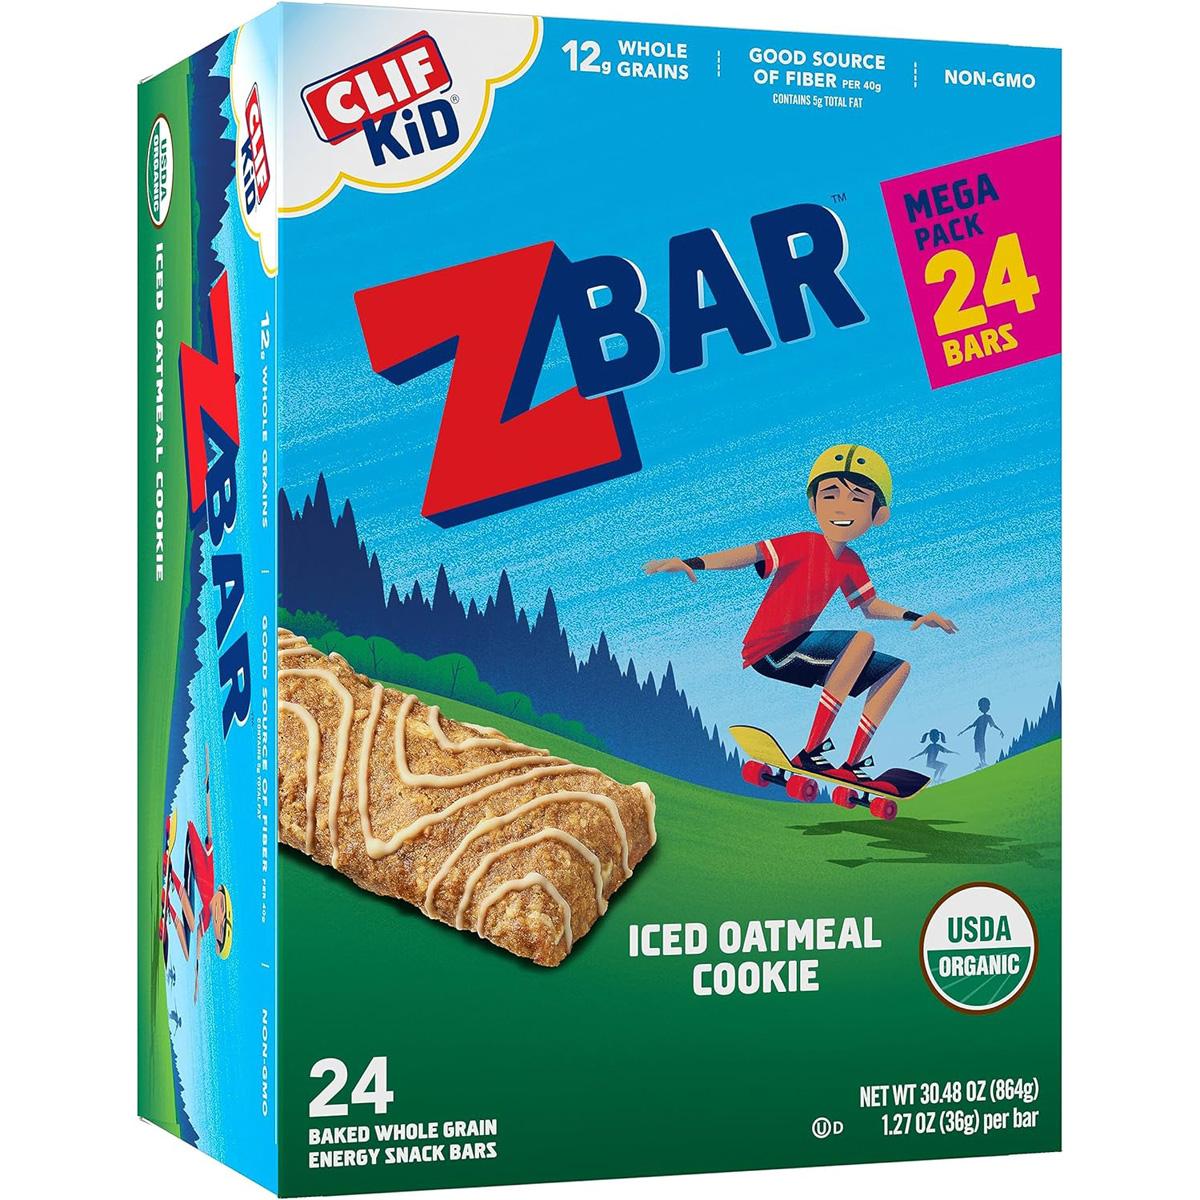 Clif Kid Zbar Iced Oatmeal Cookie 24 Pack for $13.20 Shipped